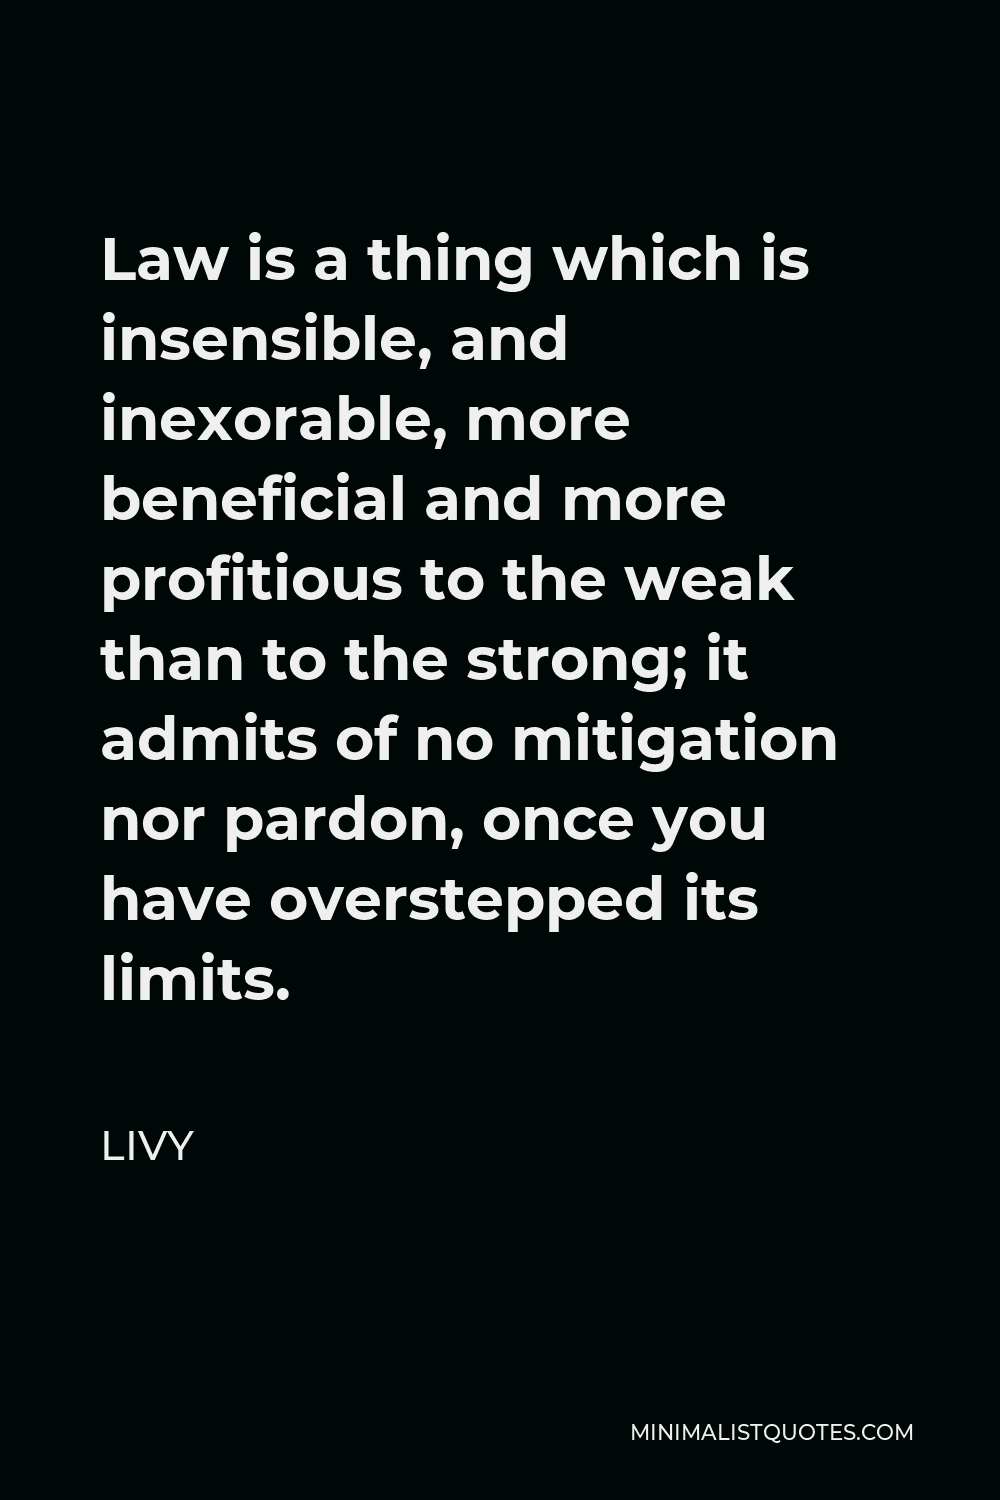 Livy Quote - Law is a thing which is insensible, and inexorable, more beneficial and more profitious to the weak than to the strong; it admits of no mitigation nor pardon, once you have overstepped its limits.